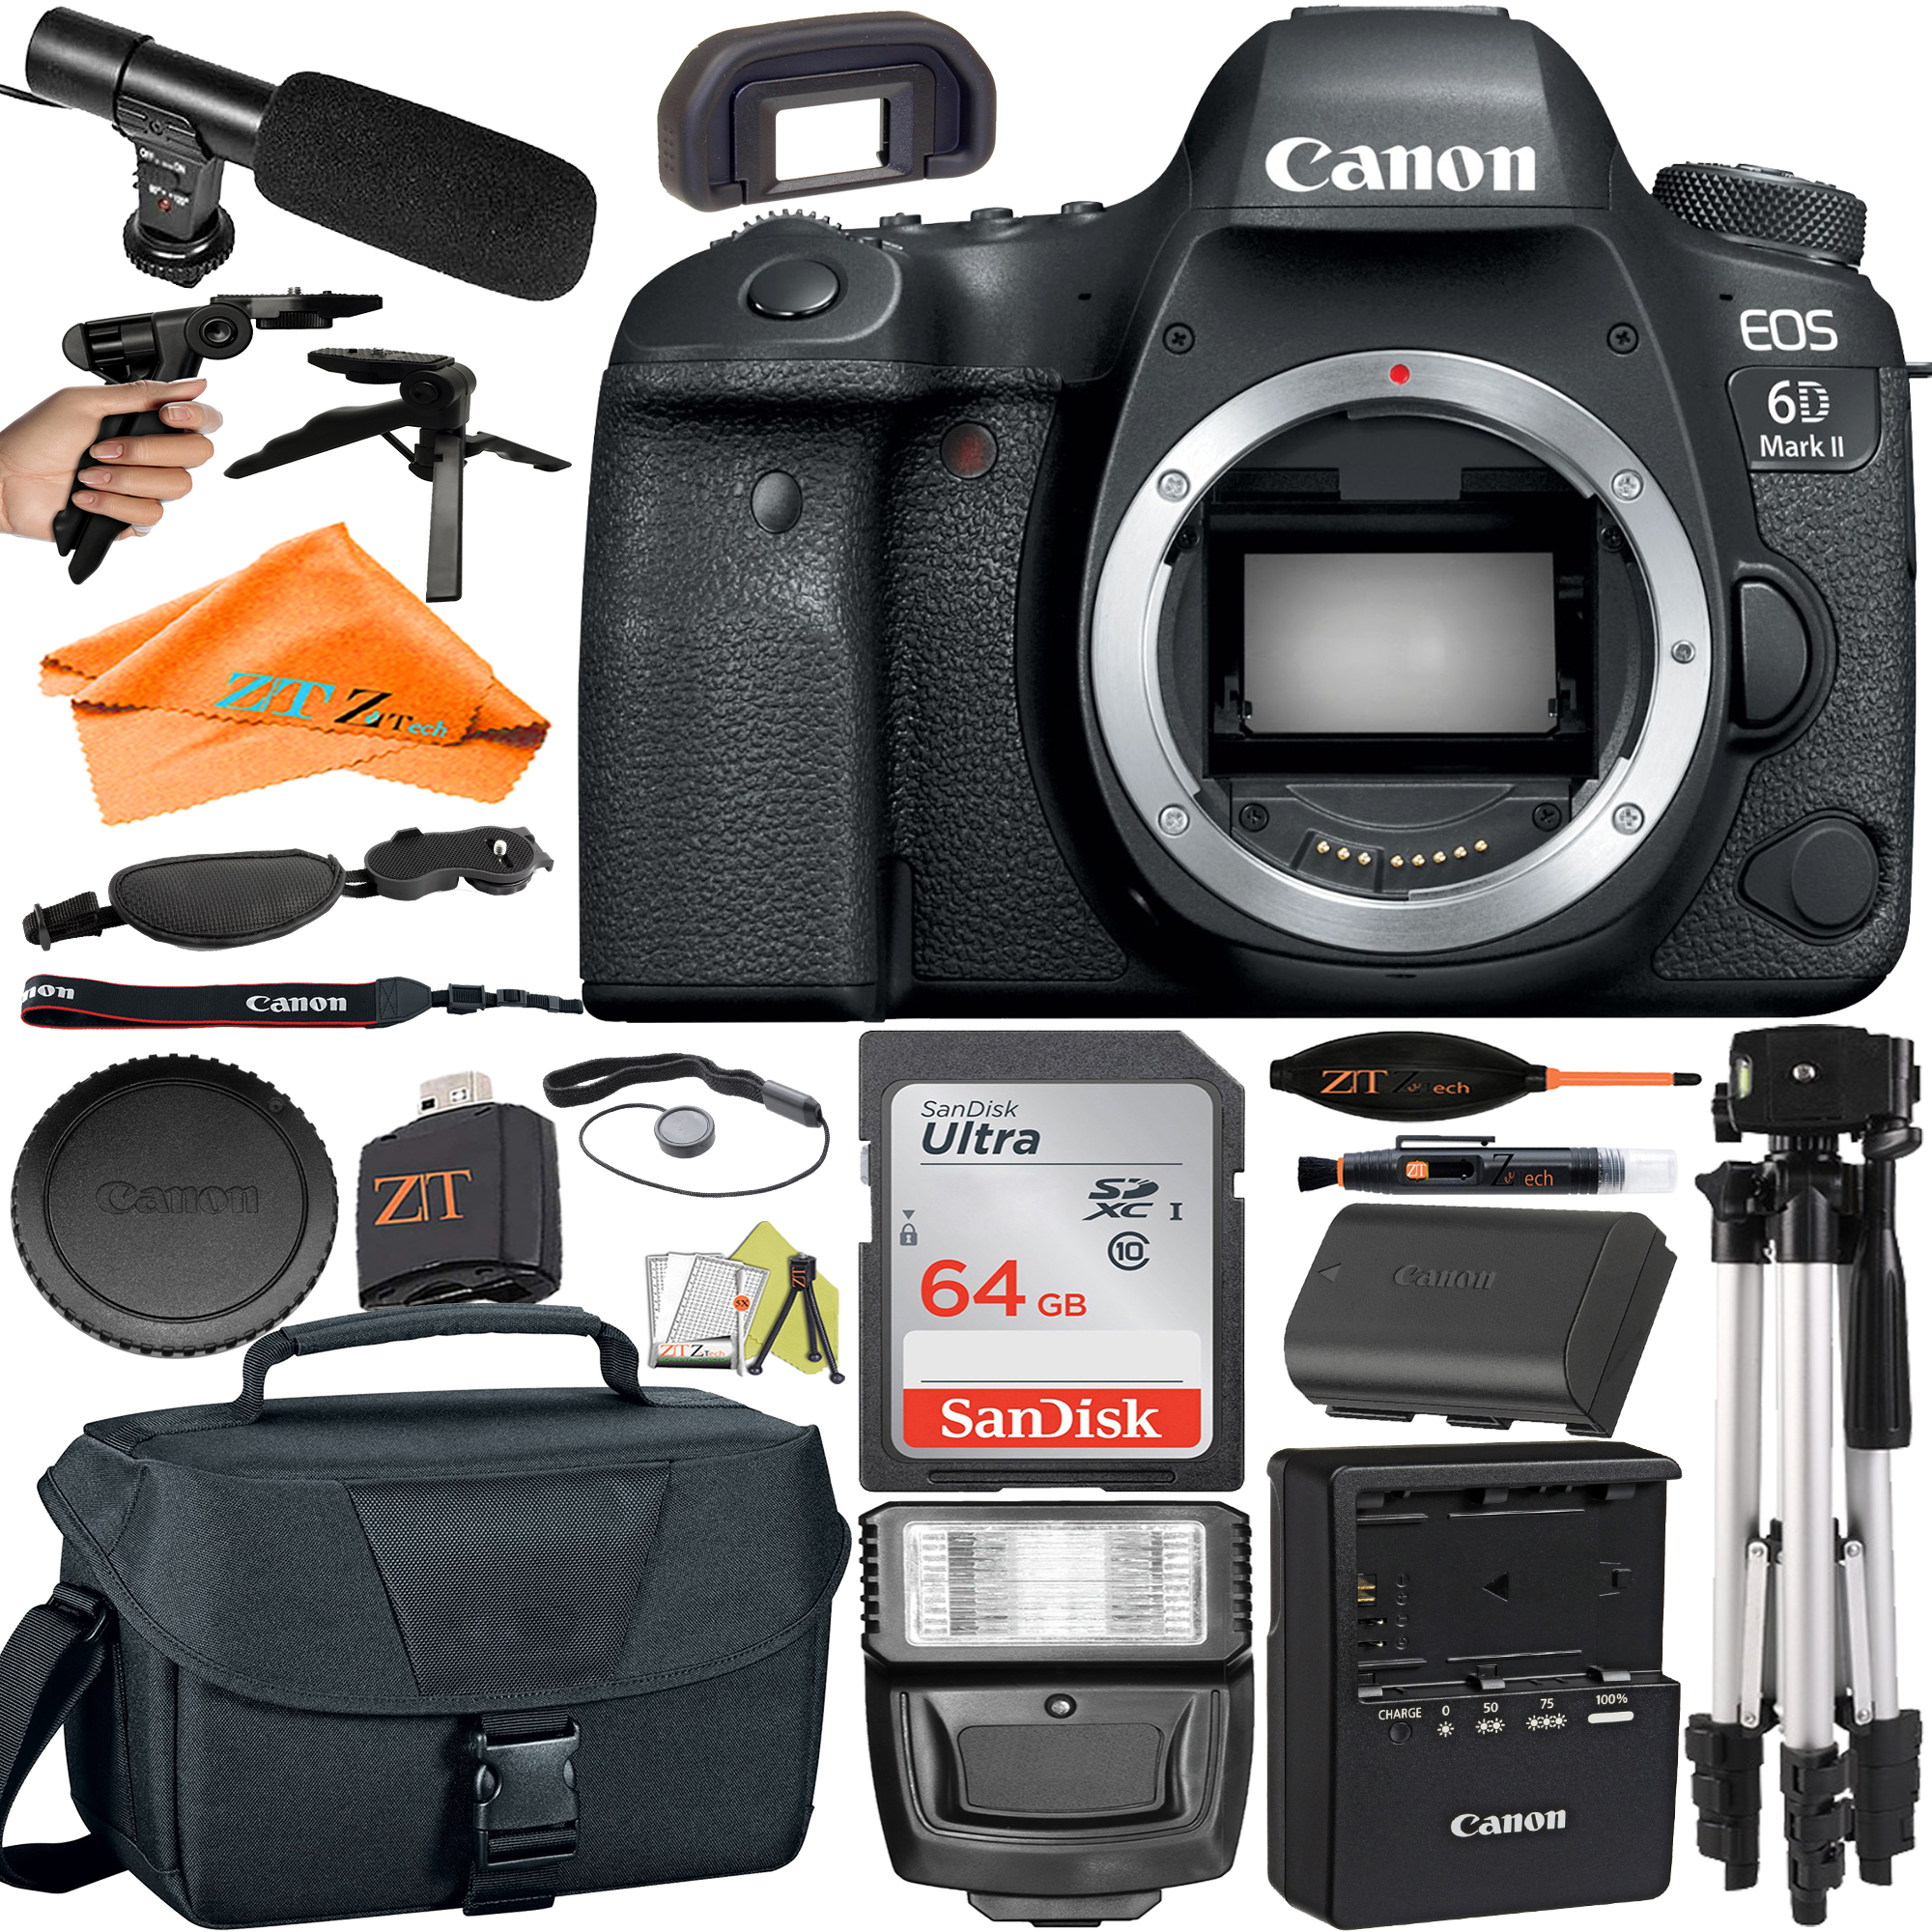 Canon EOS 6D Mark II DSLR Camera (Body Only) with SanDisk 64GB + Microphone + Case + ZeeTech Accessory Bundle